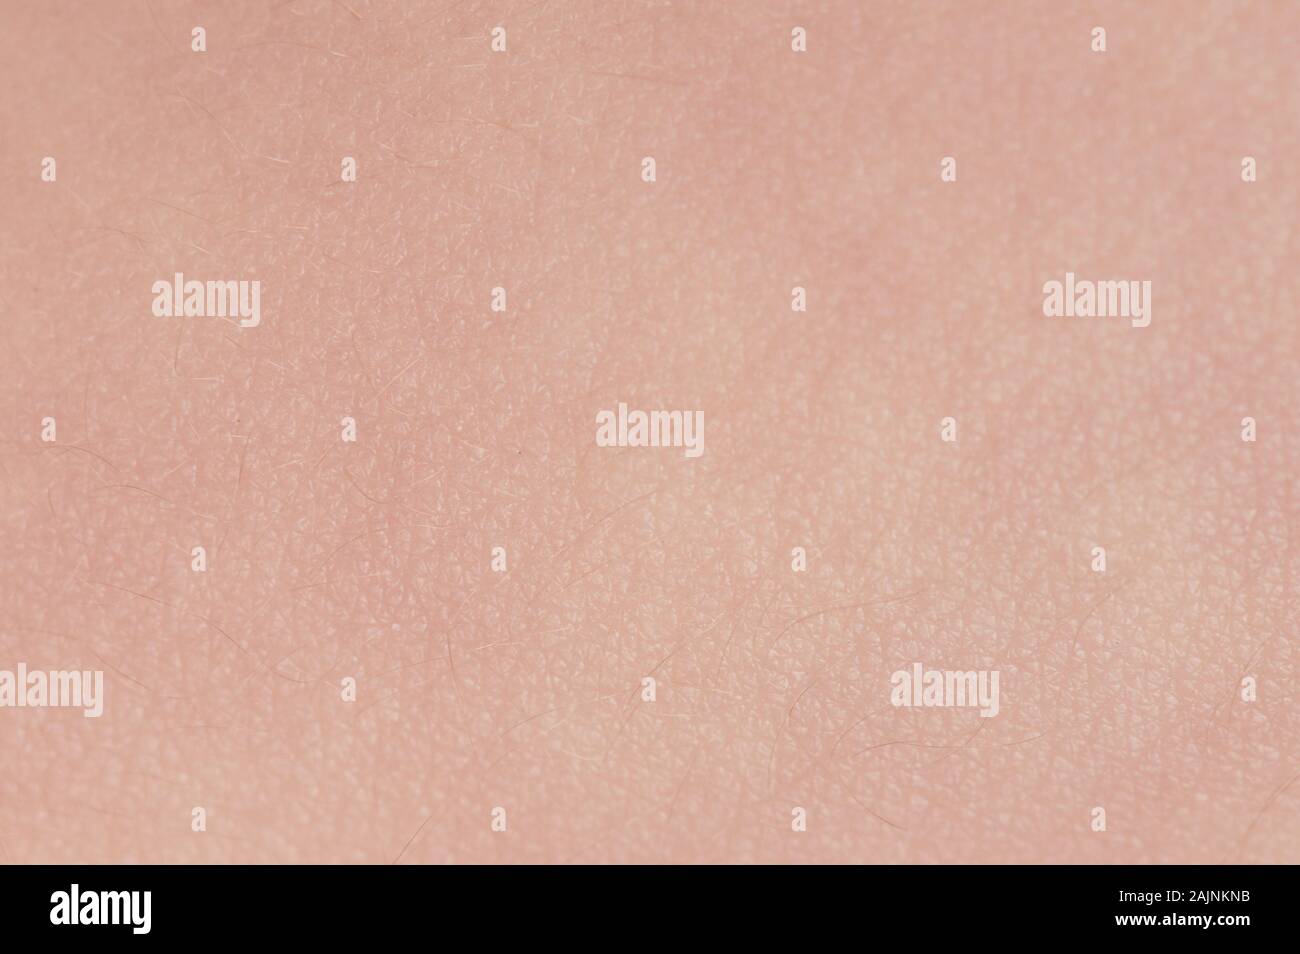 Clean pink baby skin texture background. Pattern of skin cells Stock Photo